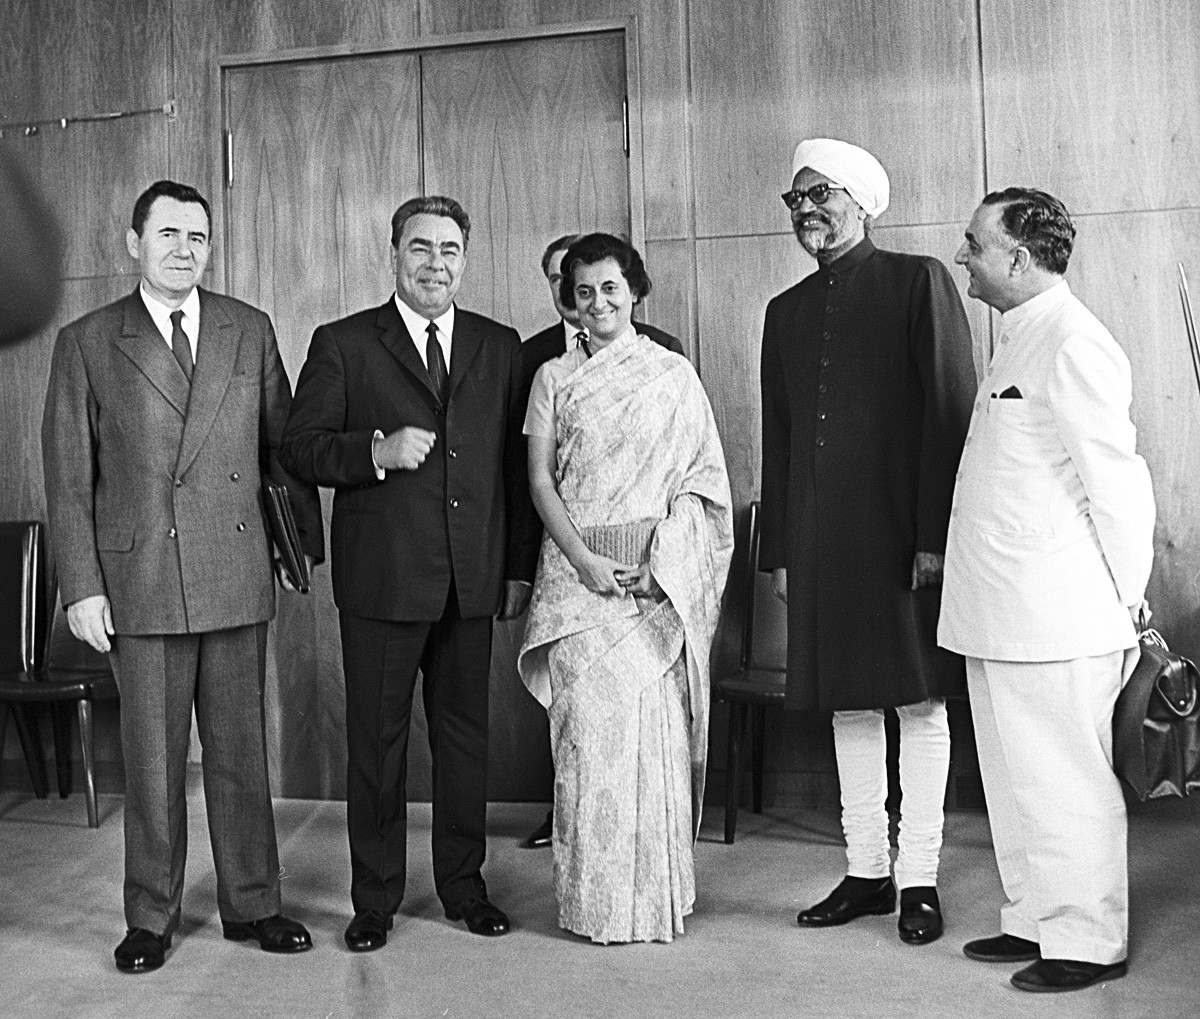 Brezhnev and Gandhi in Moscow, accompanied by other Soviet leaders.